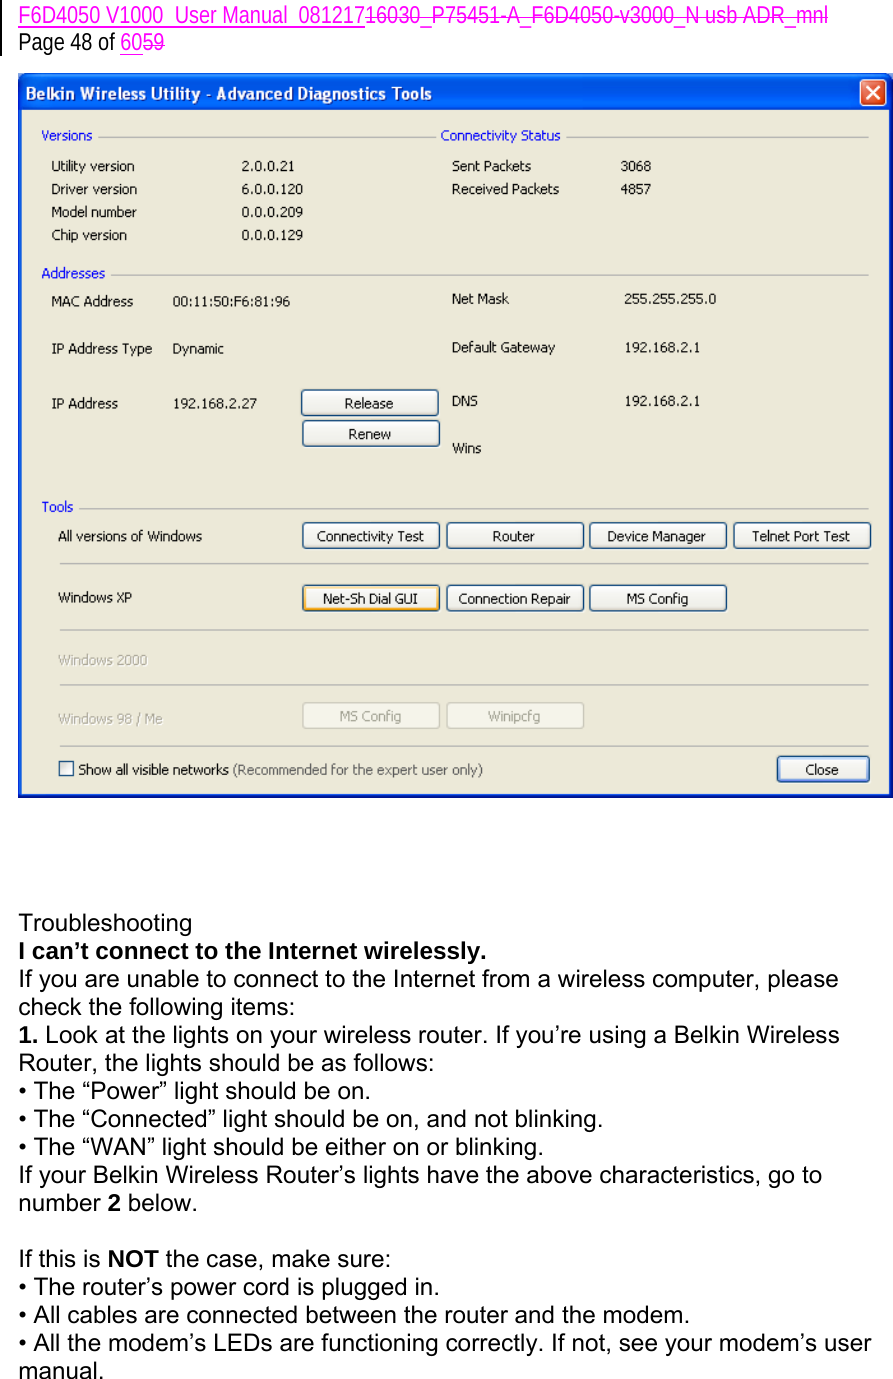 F6D4050 V1000_User Manual_08121716030_P75451-A_F6D4050-v3000_N usb ADR_mnl Page 48 of 6059       Troubleshooting I can’t connect to the Internet wirelessly. If you are unable to connect to the Internet from a wireless computer, please check the following items: 1. Look at the lights on your wireless router. If you’re using a Belkin Wireless Router, the lights should be as follows: • The “Power” light should be on. • The “Connected” light should be on, and not blinking. • The “WAN” light should be either on or blinking. If your Belkin Wireless Router’s lights have the above characteristics, go to number 2 below.  If this is NOT the case, make sure: • The router’s power cord is plugged in. • All cables are connected between the router and the modem. • All the modem’s LEDs are functioning correctly. If not, see your modem’s user manual. 